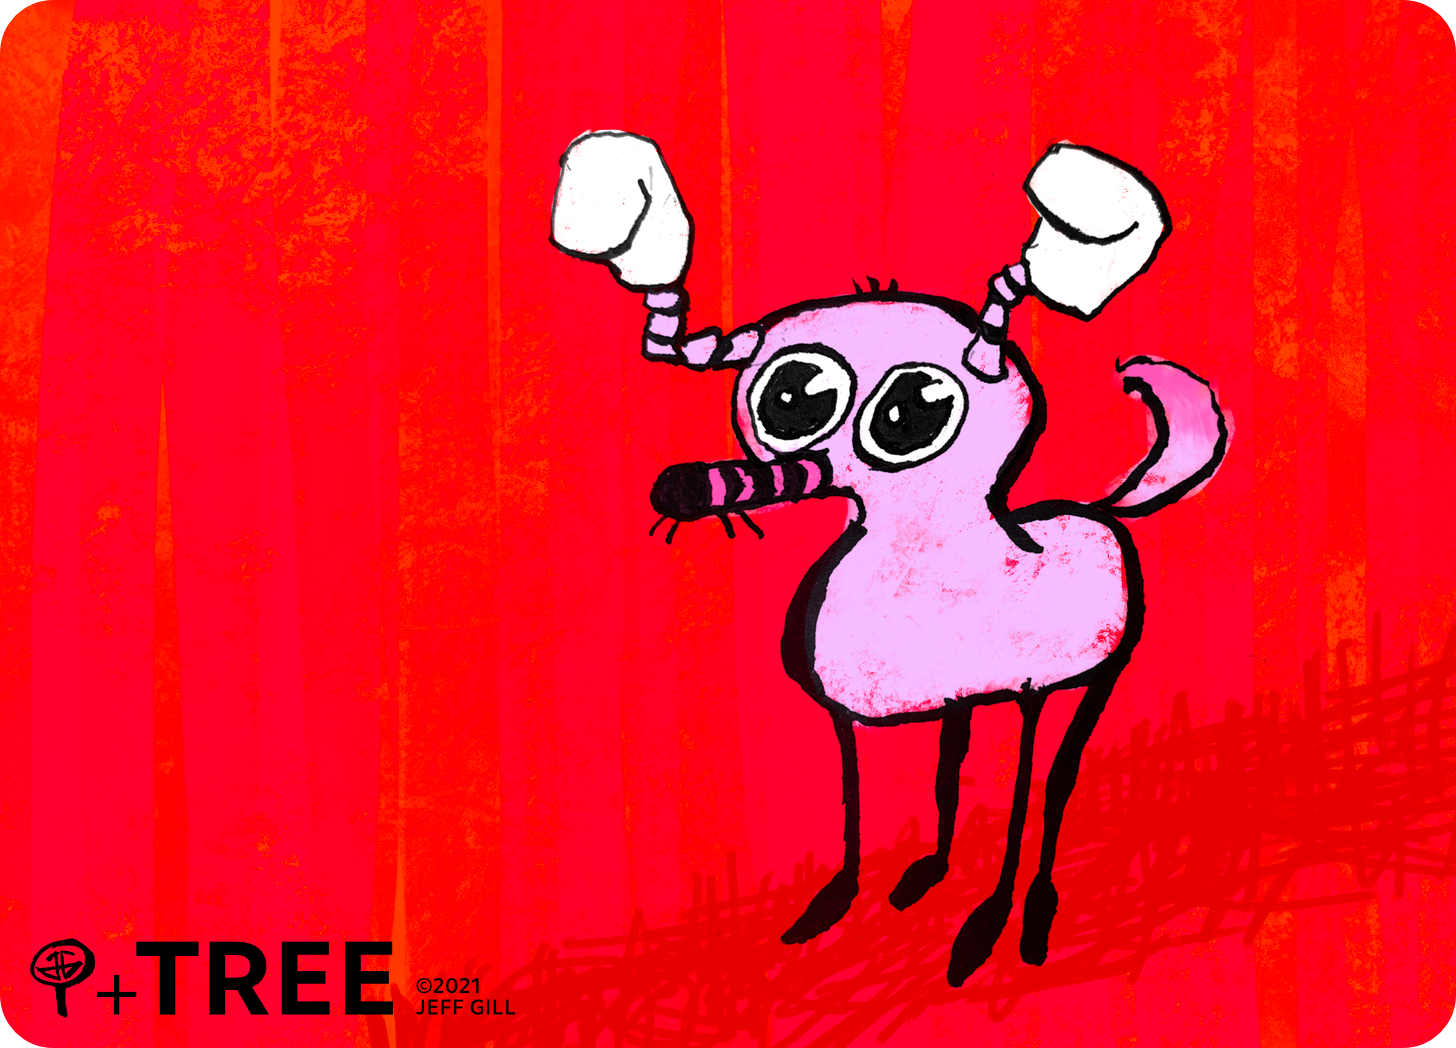 A large-eyed pink antelope with boxing glove antlers standing in a red field